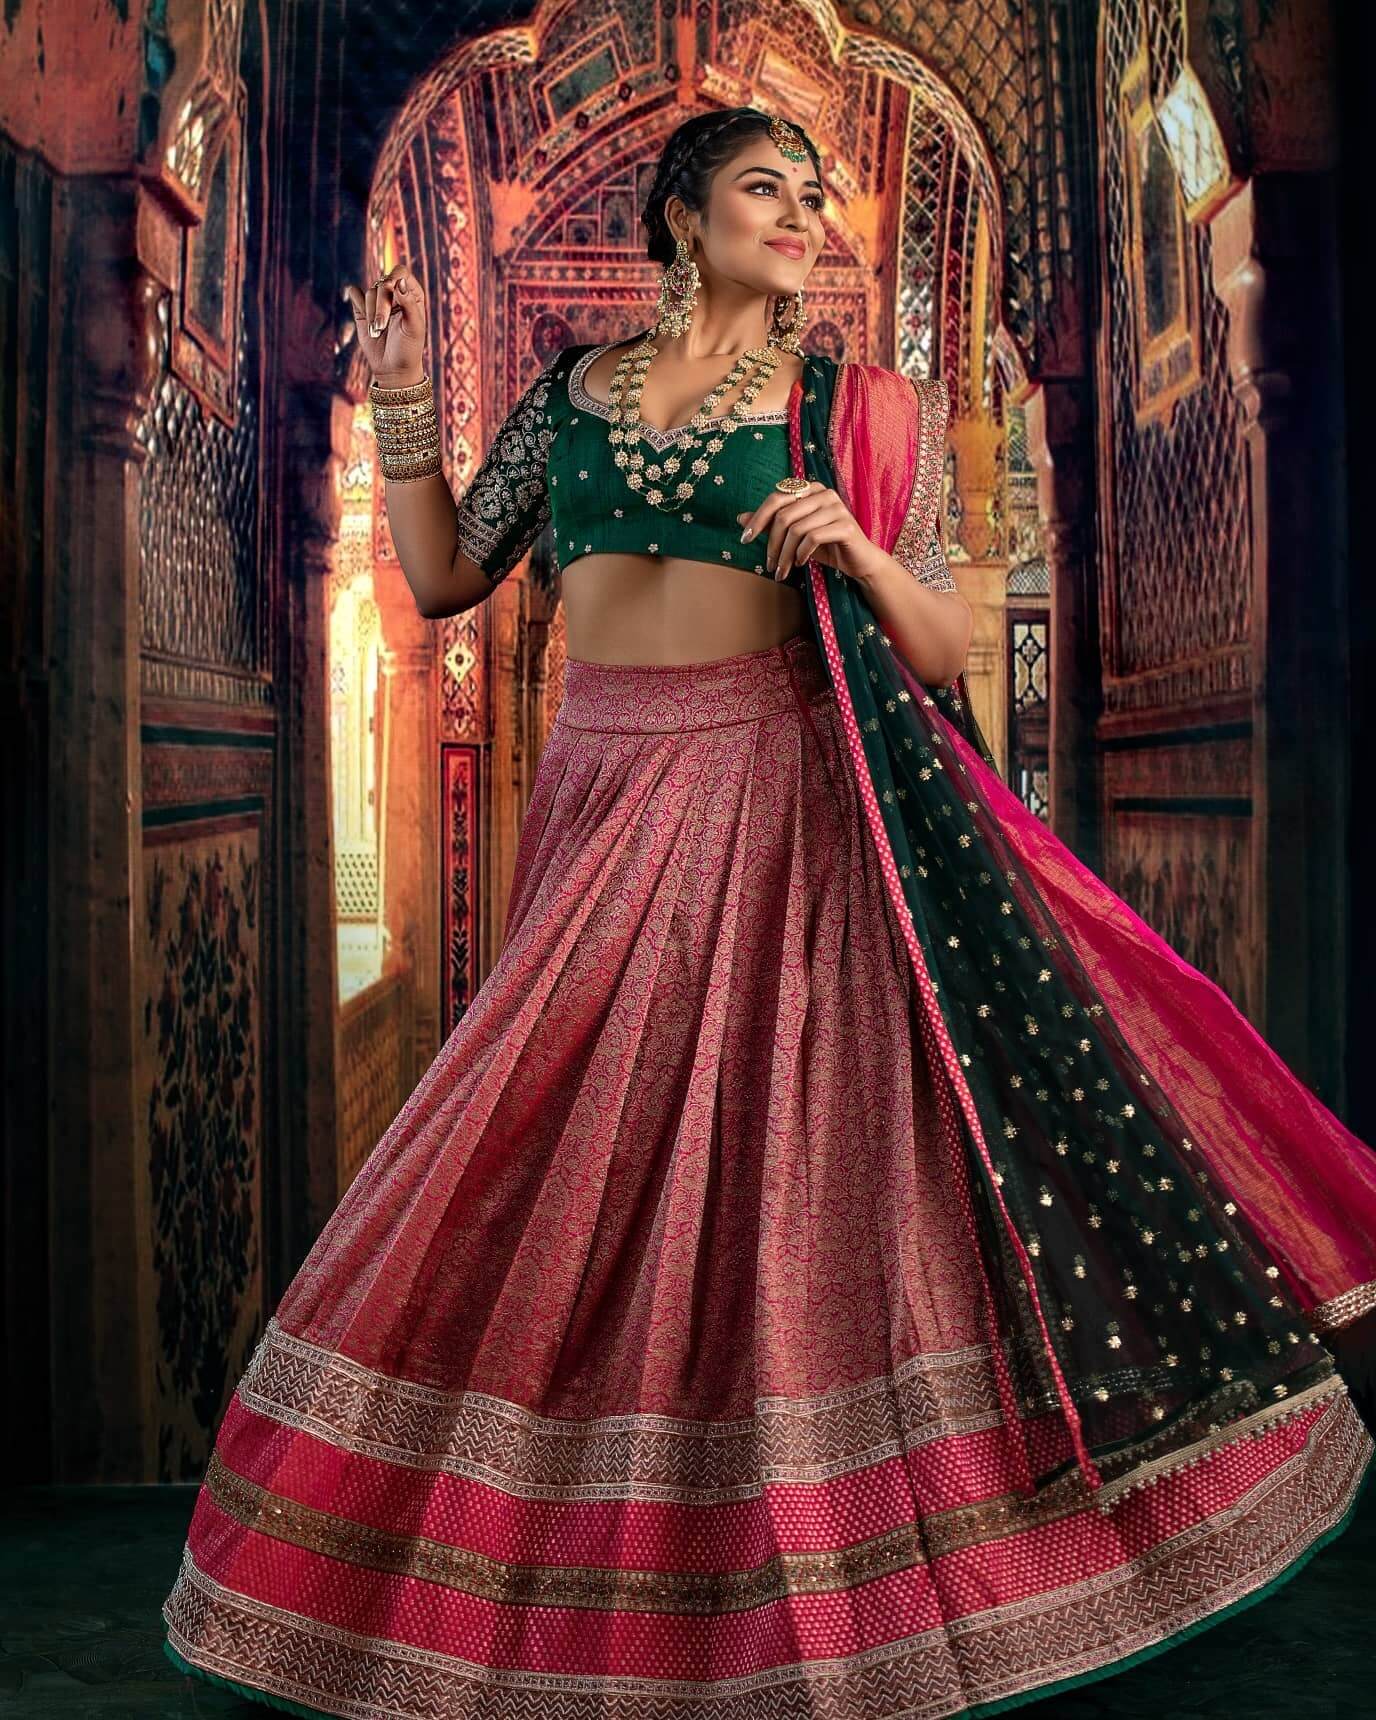 Indhuja Flattering Tradition & Western Outfit Look In Pink Lehenga With Green Blouse & Dupatta Paired With Heavy Kundan Jewellery Perfect Bridal Lehenga Inspo